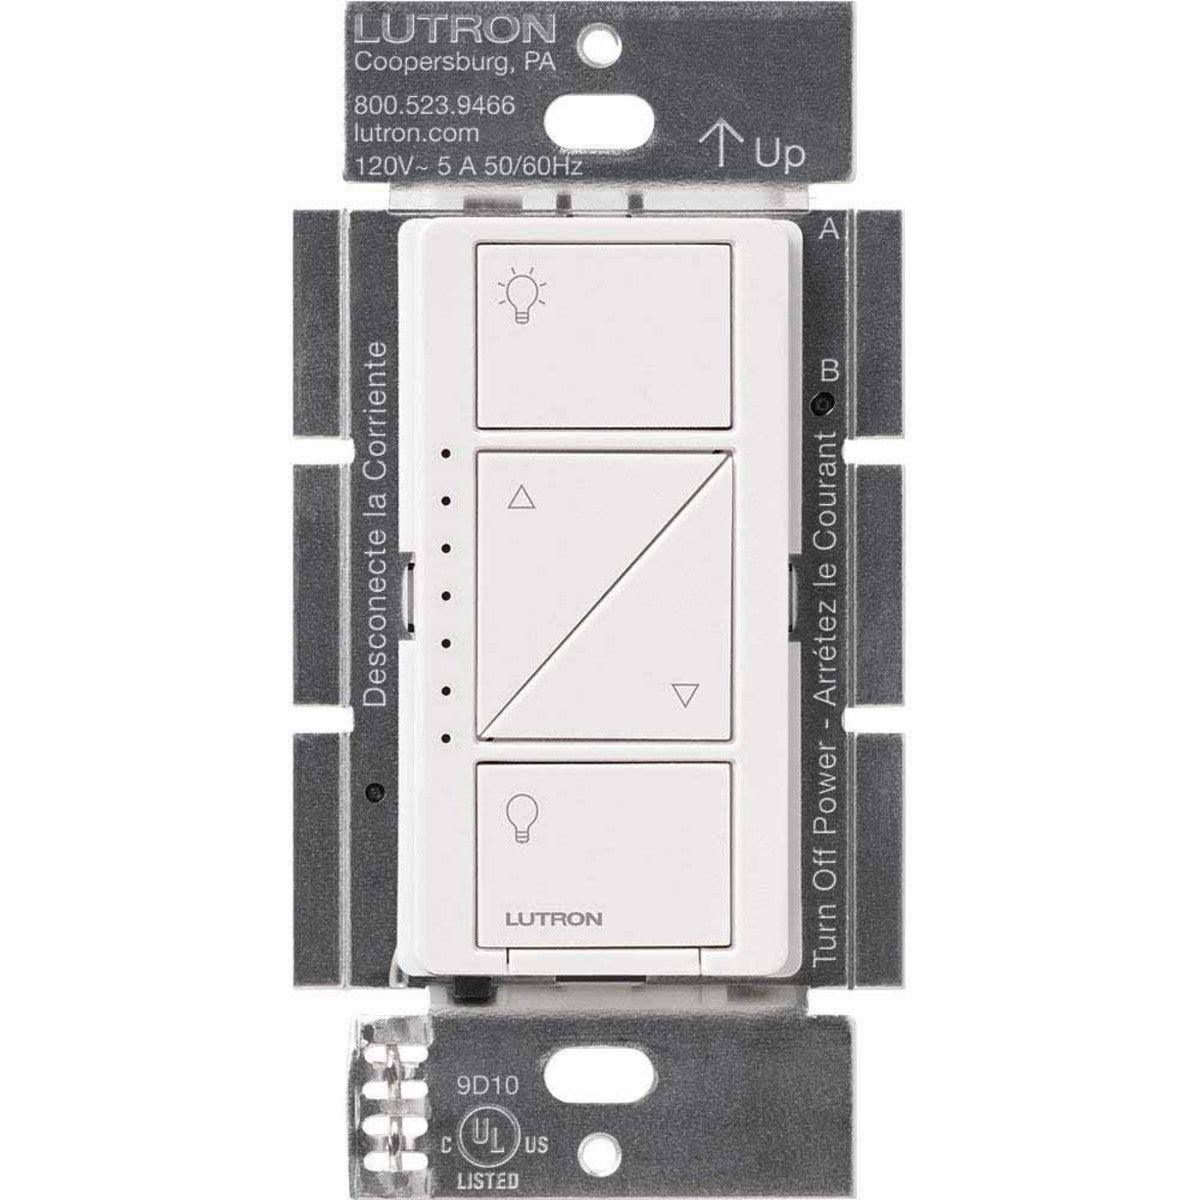 Lutron Smart Dimmer Switches